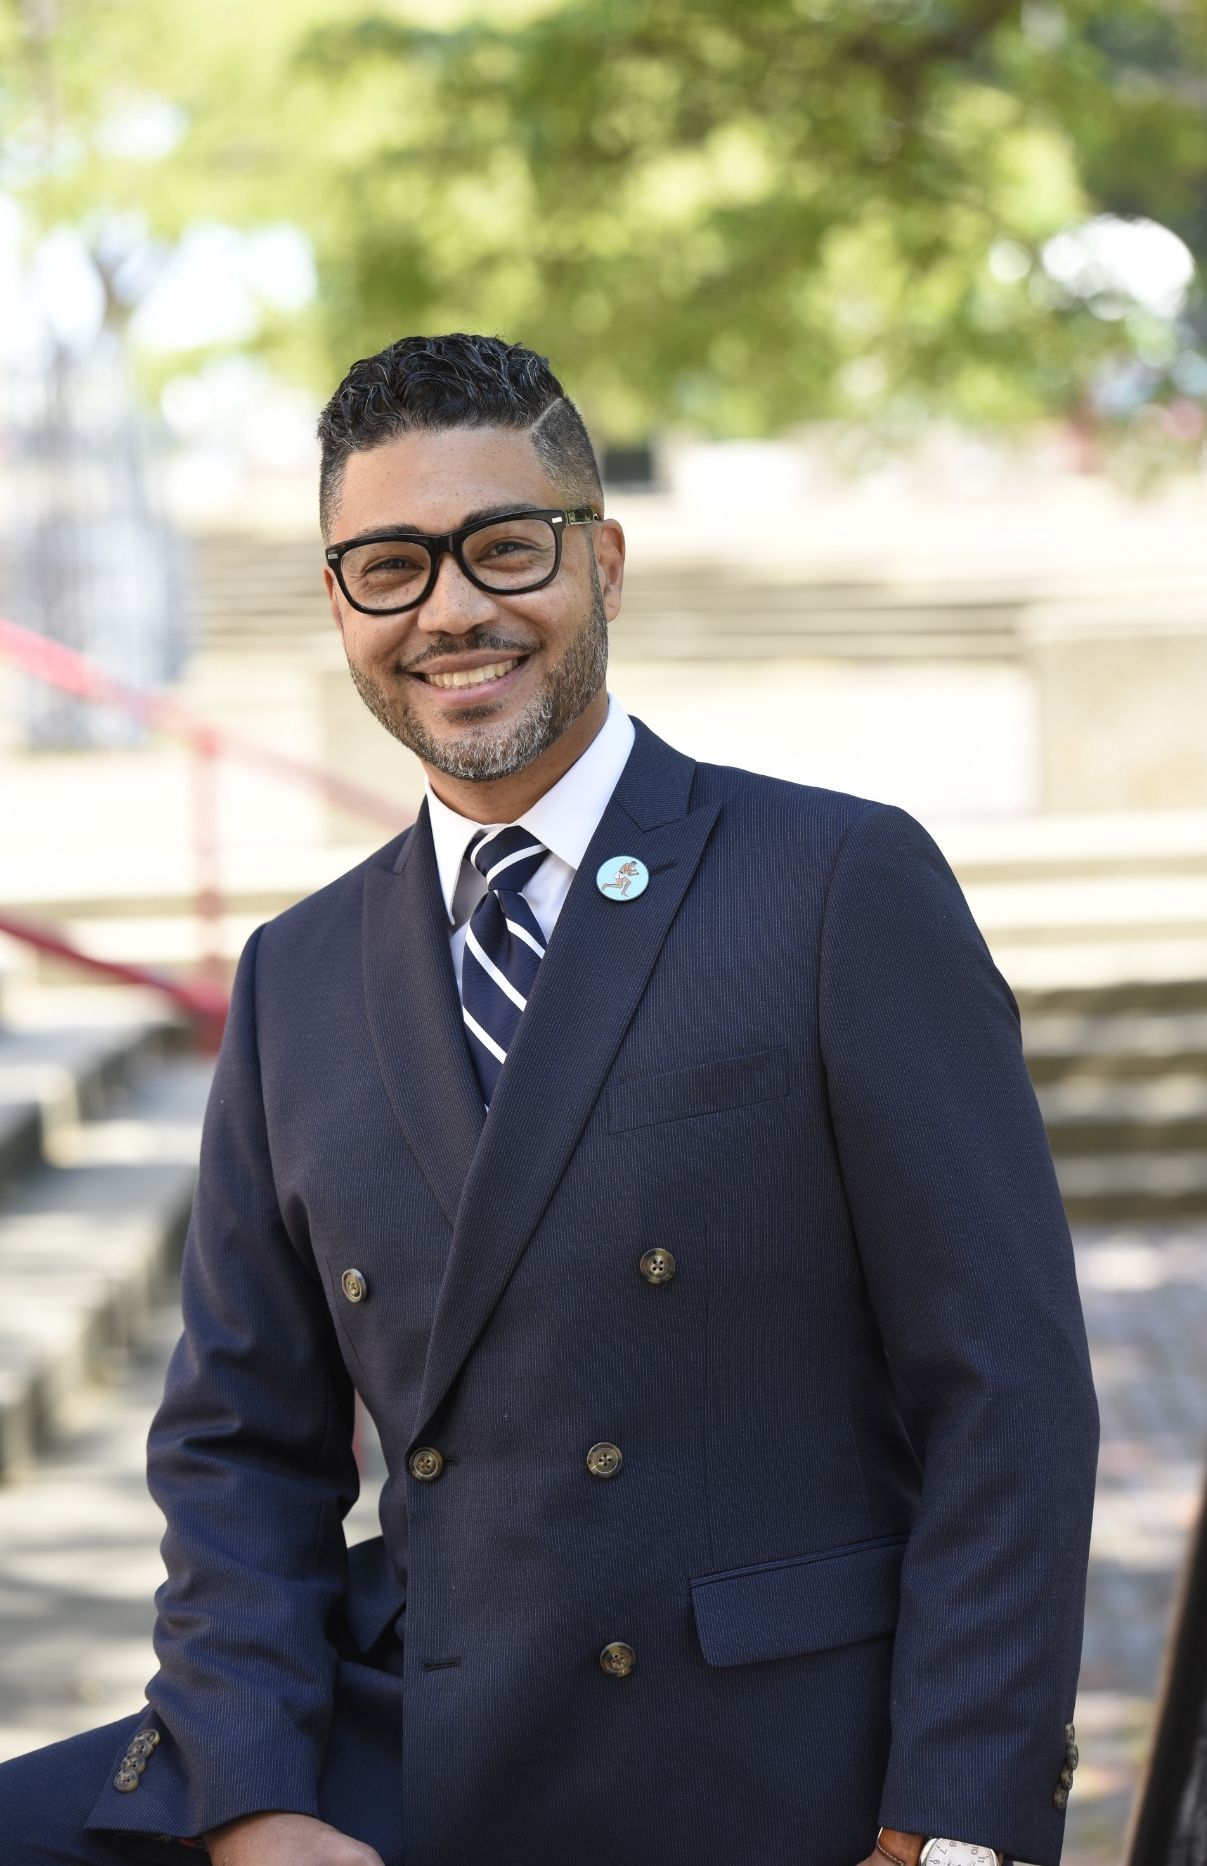 Imari Paris Jeffries smiling, standing with one arm resting on his knee, wearing a dark blue suit with gold buttons on the front, a white collared shirt and blue and white striped tie. He has short dark hair and dark rimmed glasses. Behind him are concrete stairs with a red railing, a brick-laid ground a green trees.